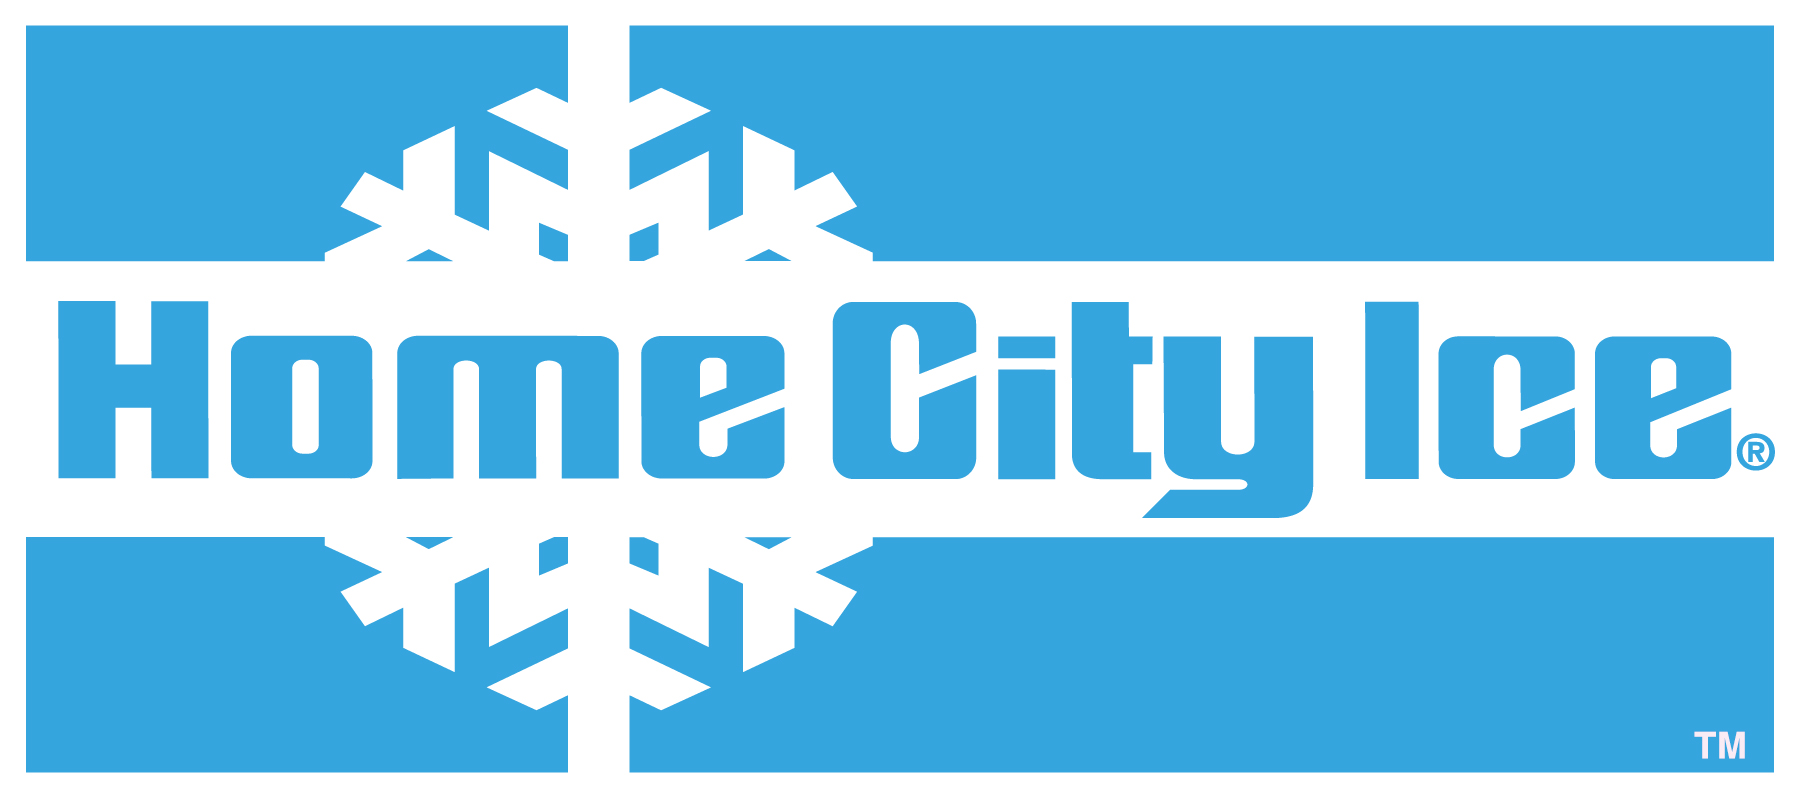 Home City Ice: The Leading Packaged Ice Supplier